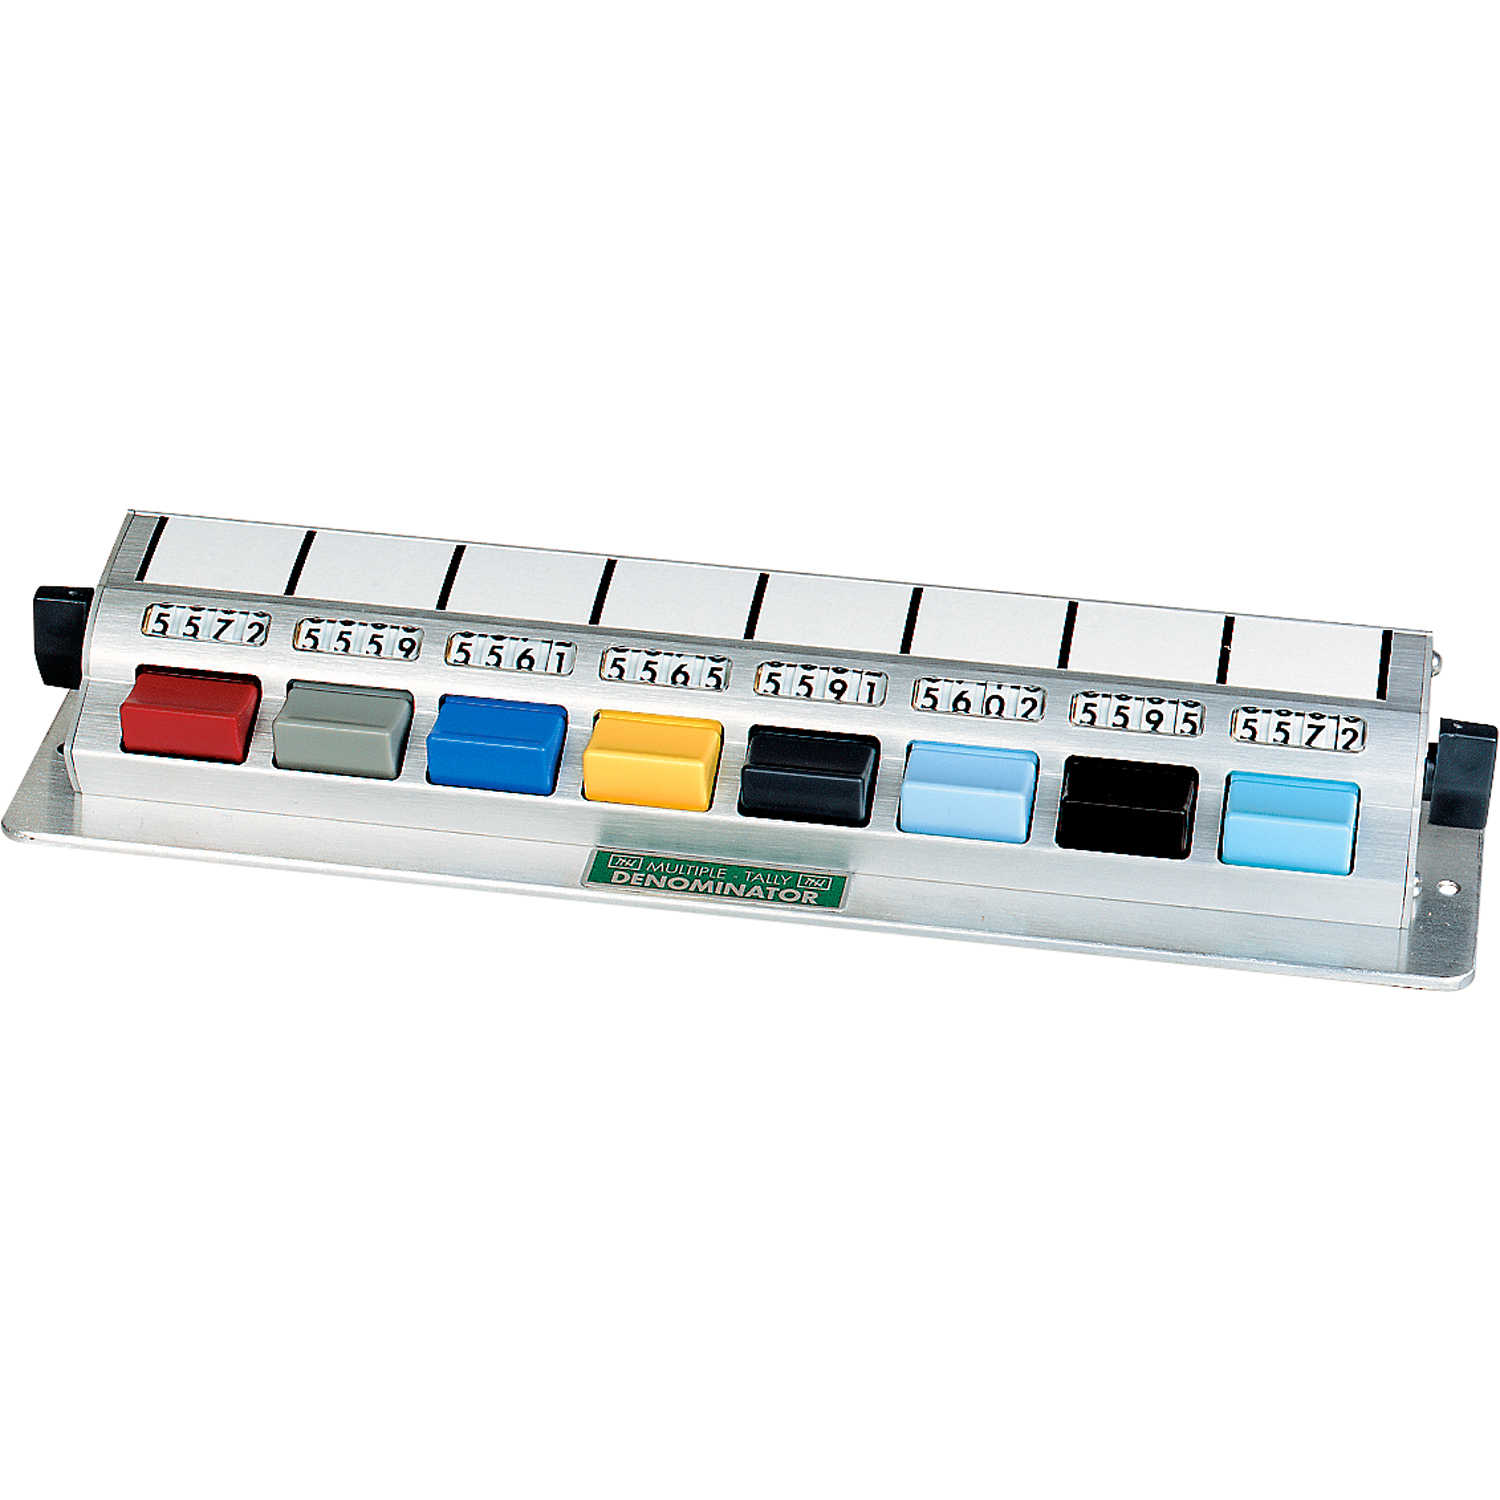 5 Counting Units Multiple Unit Tally Counters